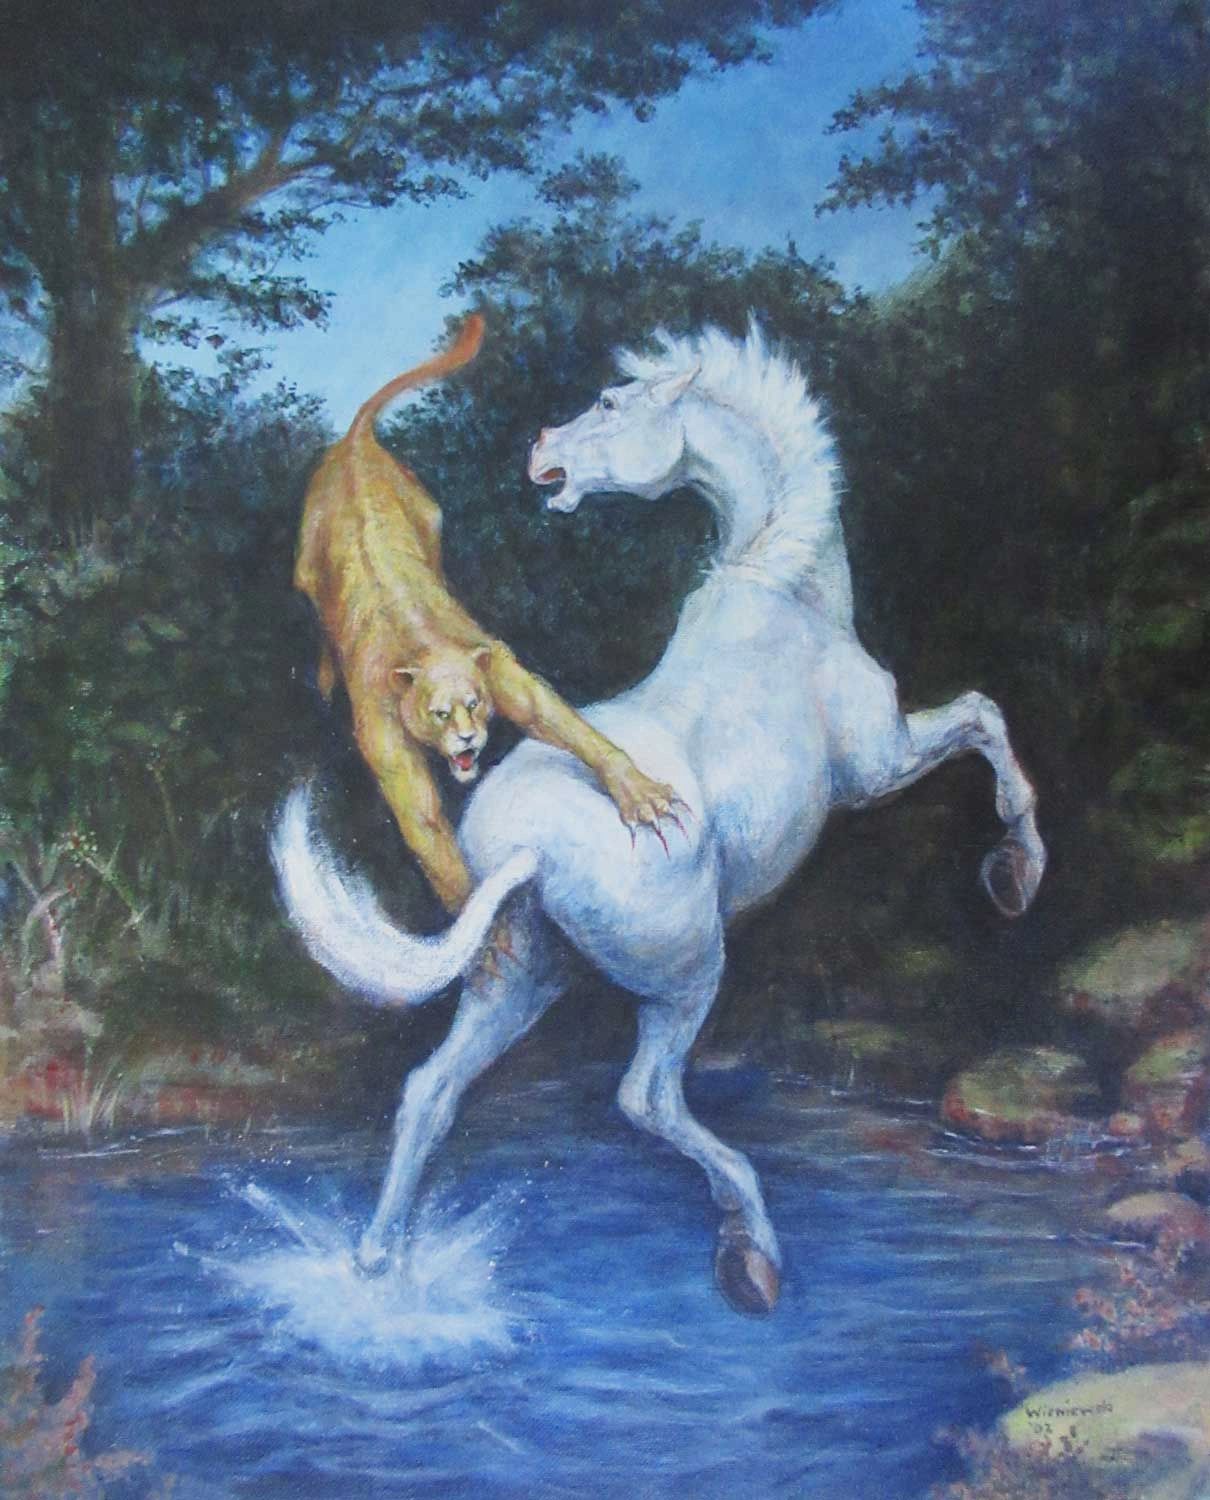 White horse being attacked by lioness. Acrylic painting by Stan Wisniewski.